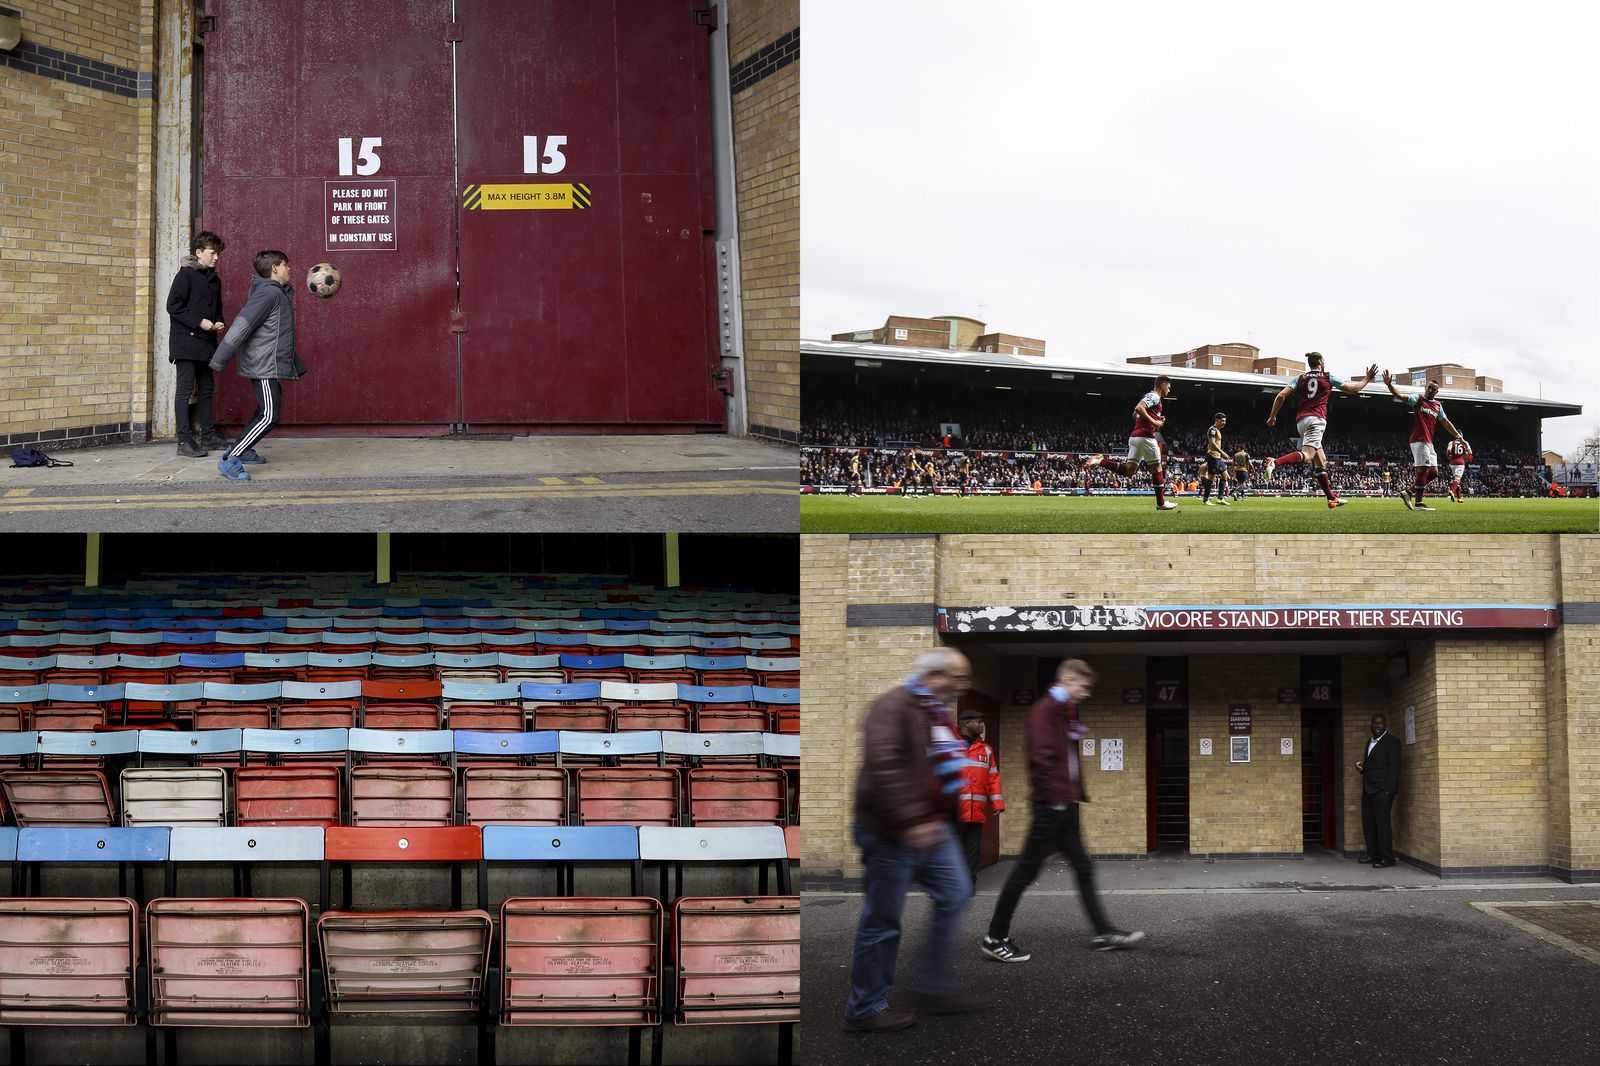 As a West Ham fan I tried to make it down to the Boleyn as much as possible to capture it before it was gone forever. Here’s a few of my favourite photos shot at the Swansea and Arsenal matches.